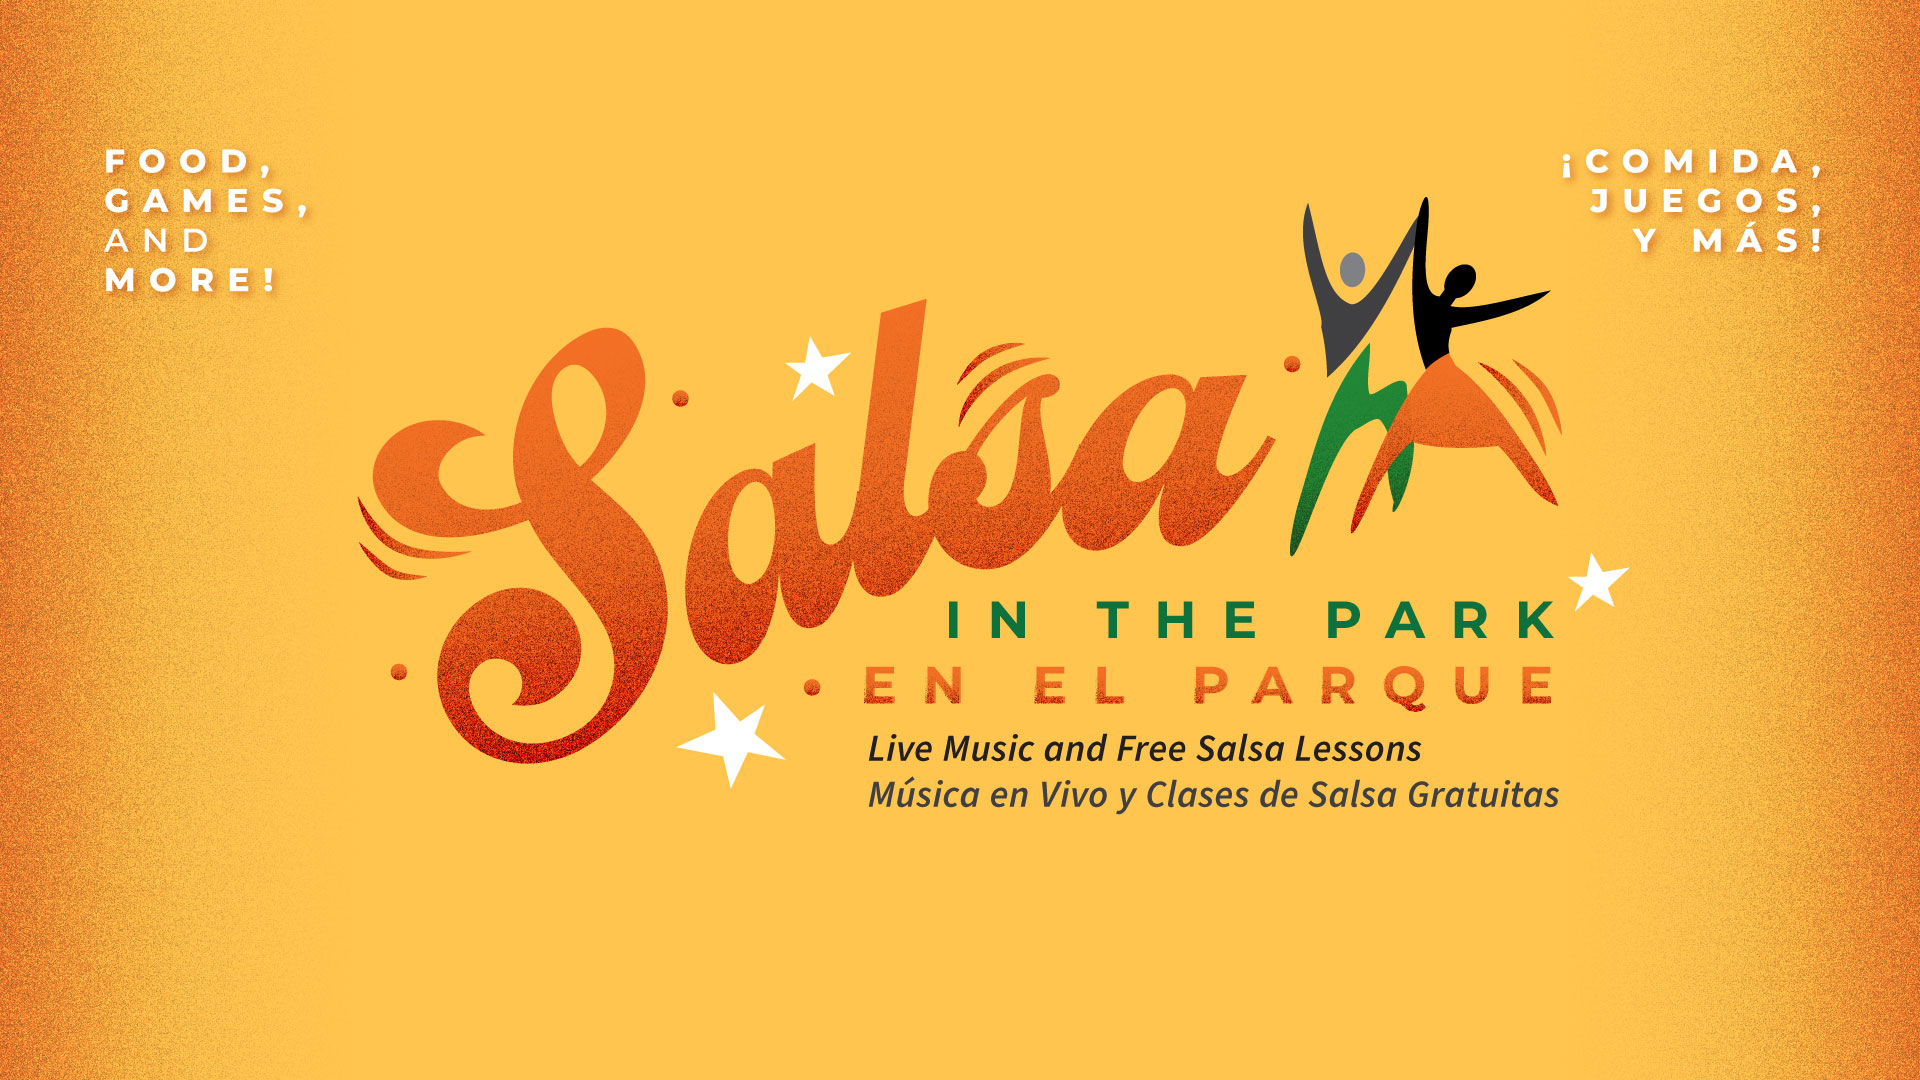 Salsa in the Park